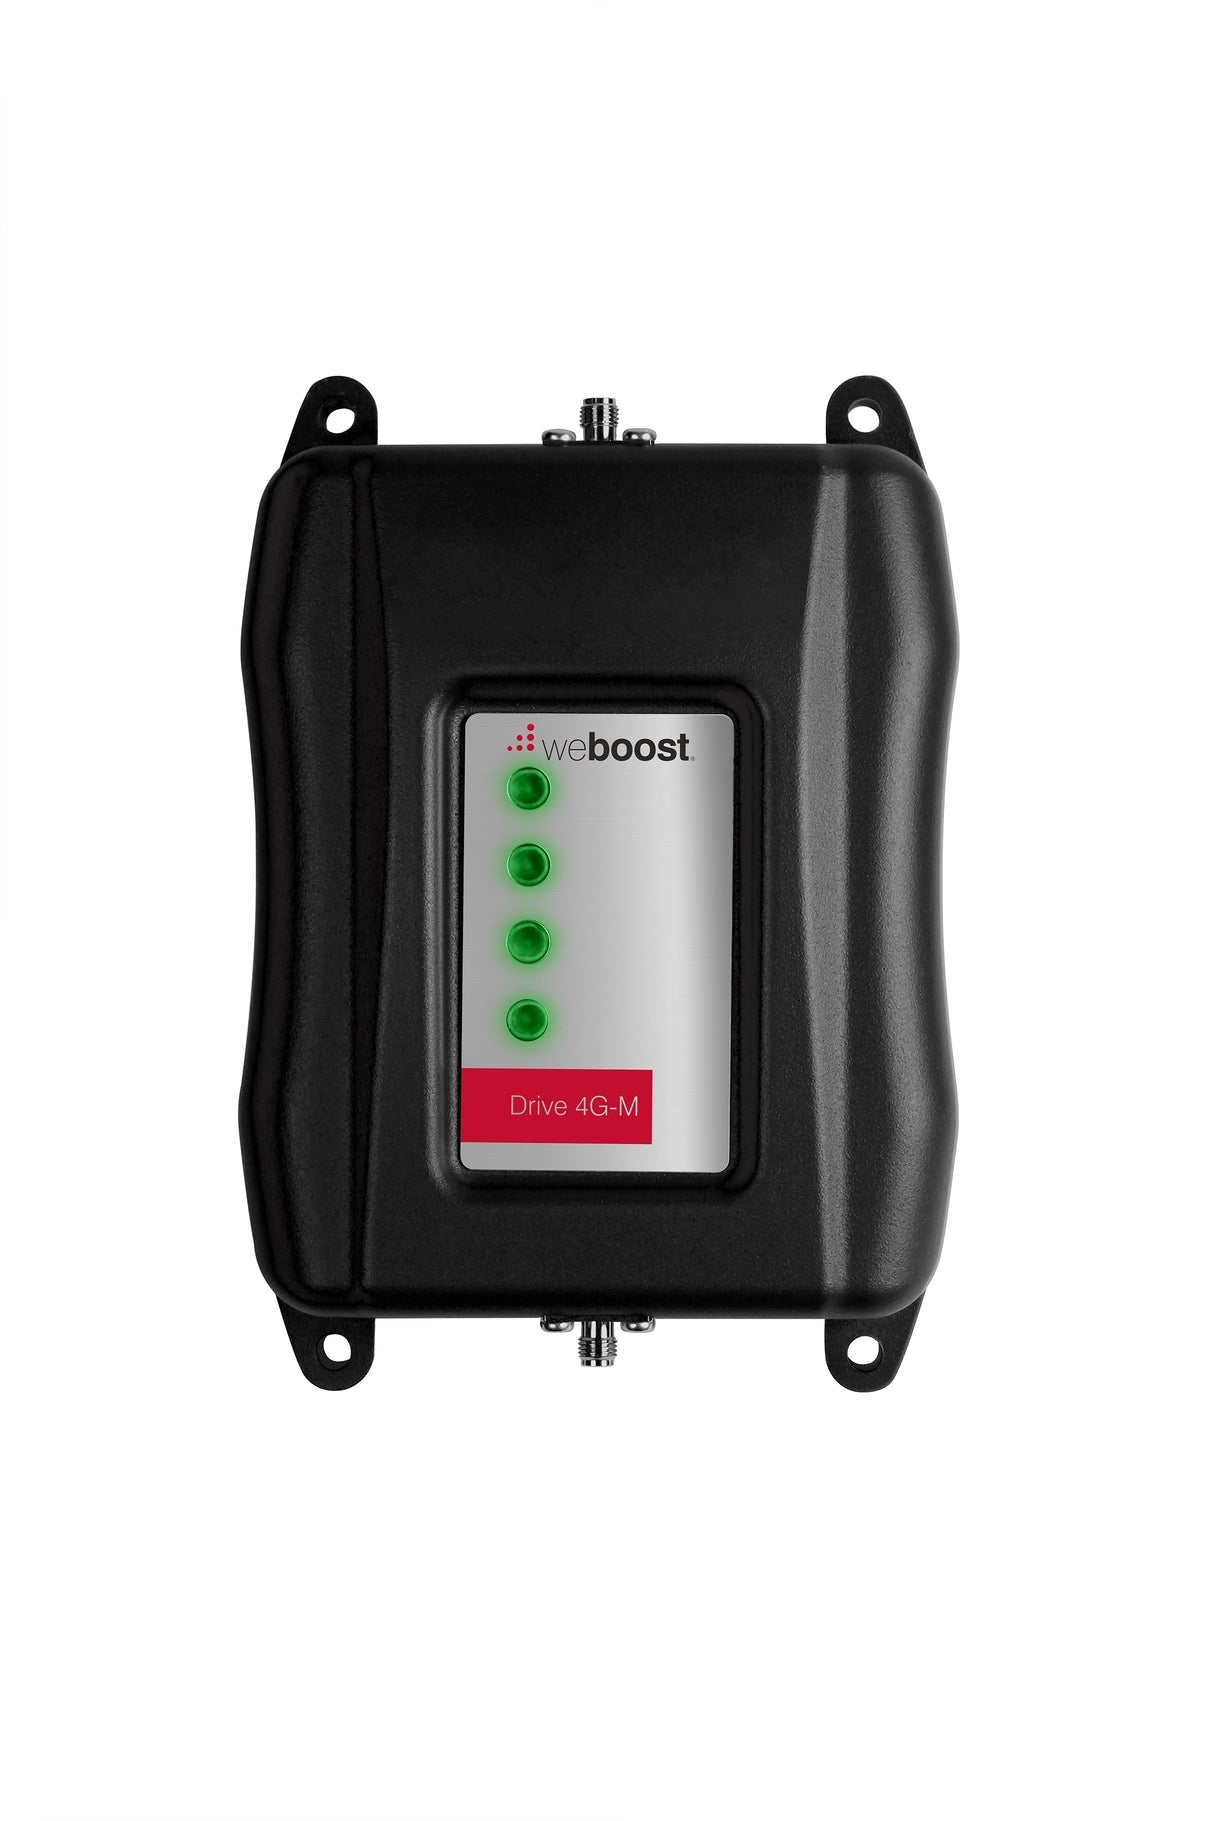 weBoost 470121 Drive 4G-M Mobile Signal Booster Kit - Amplifier